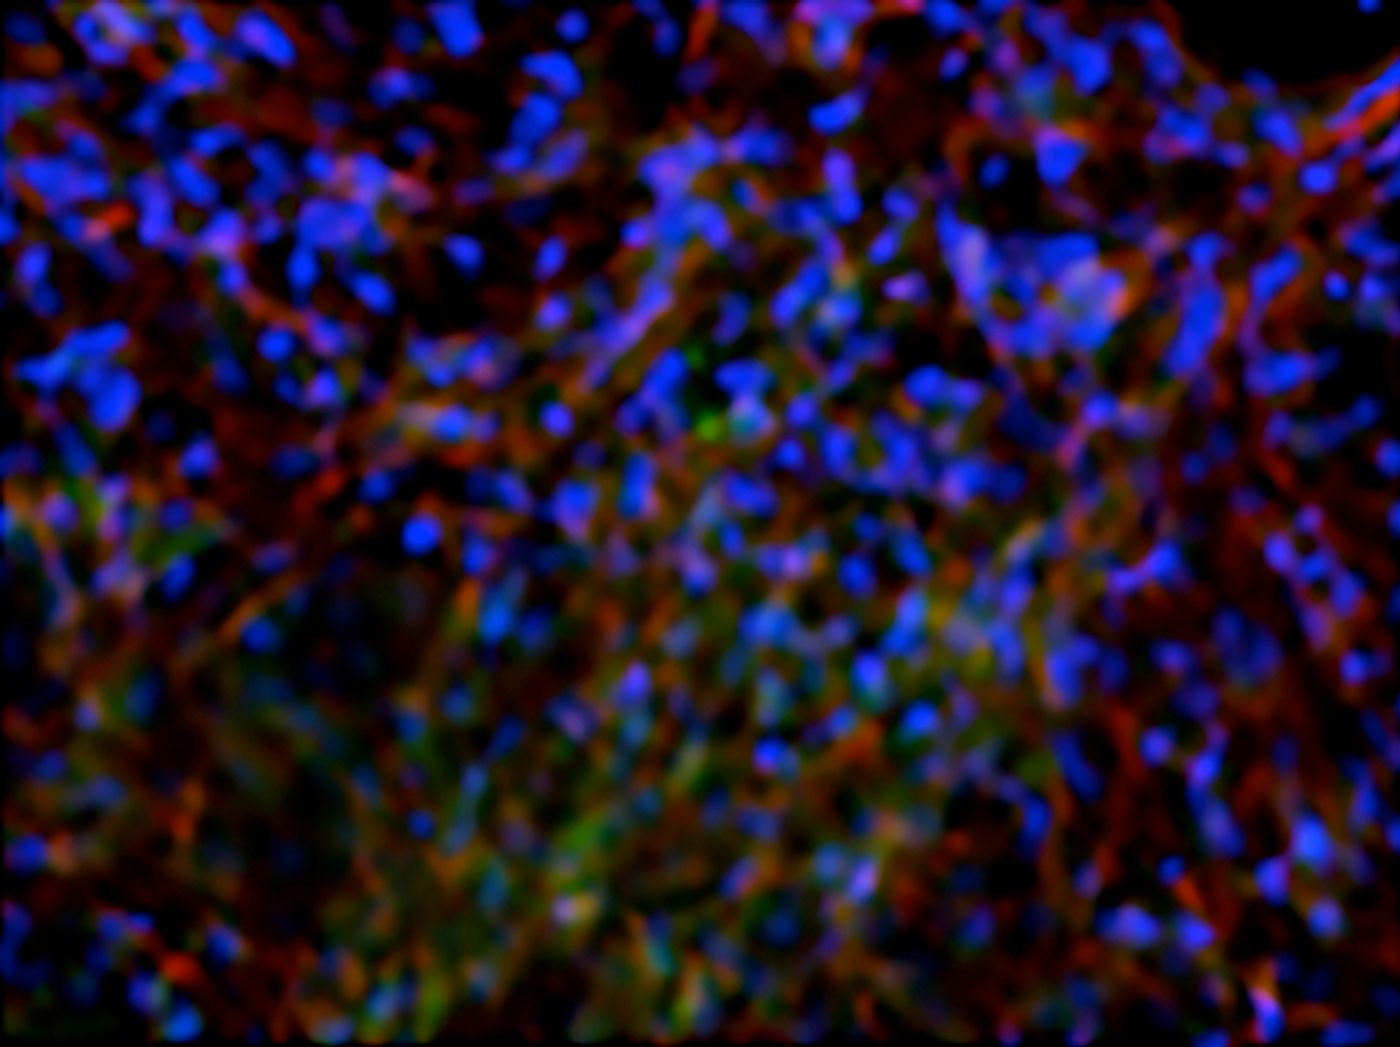 Stained image of human pluripotent stem cells cultured in adenosine to induce differentiation into functional osteoblasts. / Credit: UC San Diego